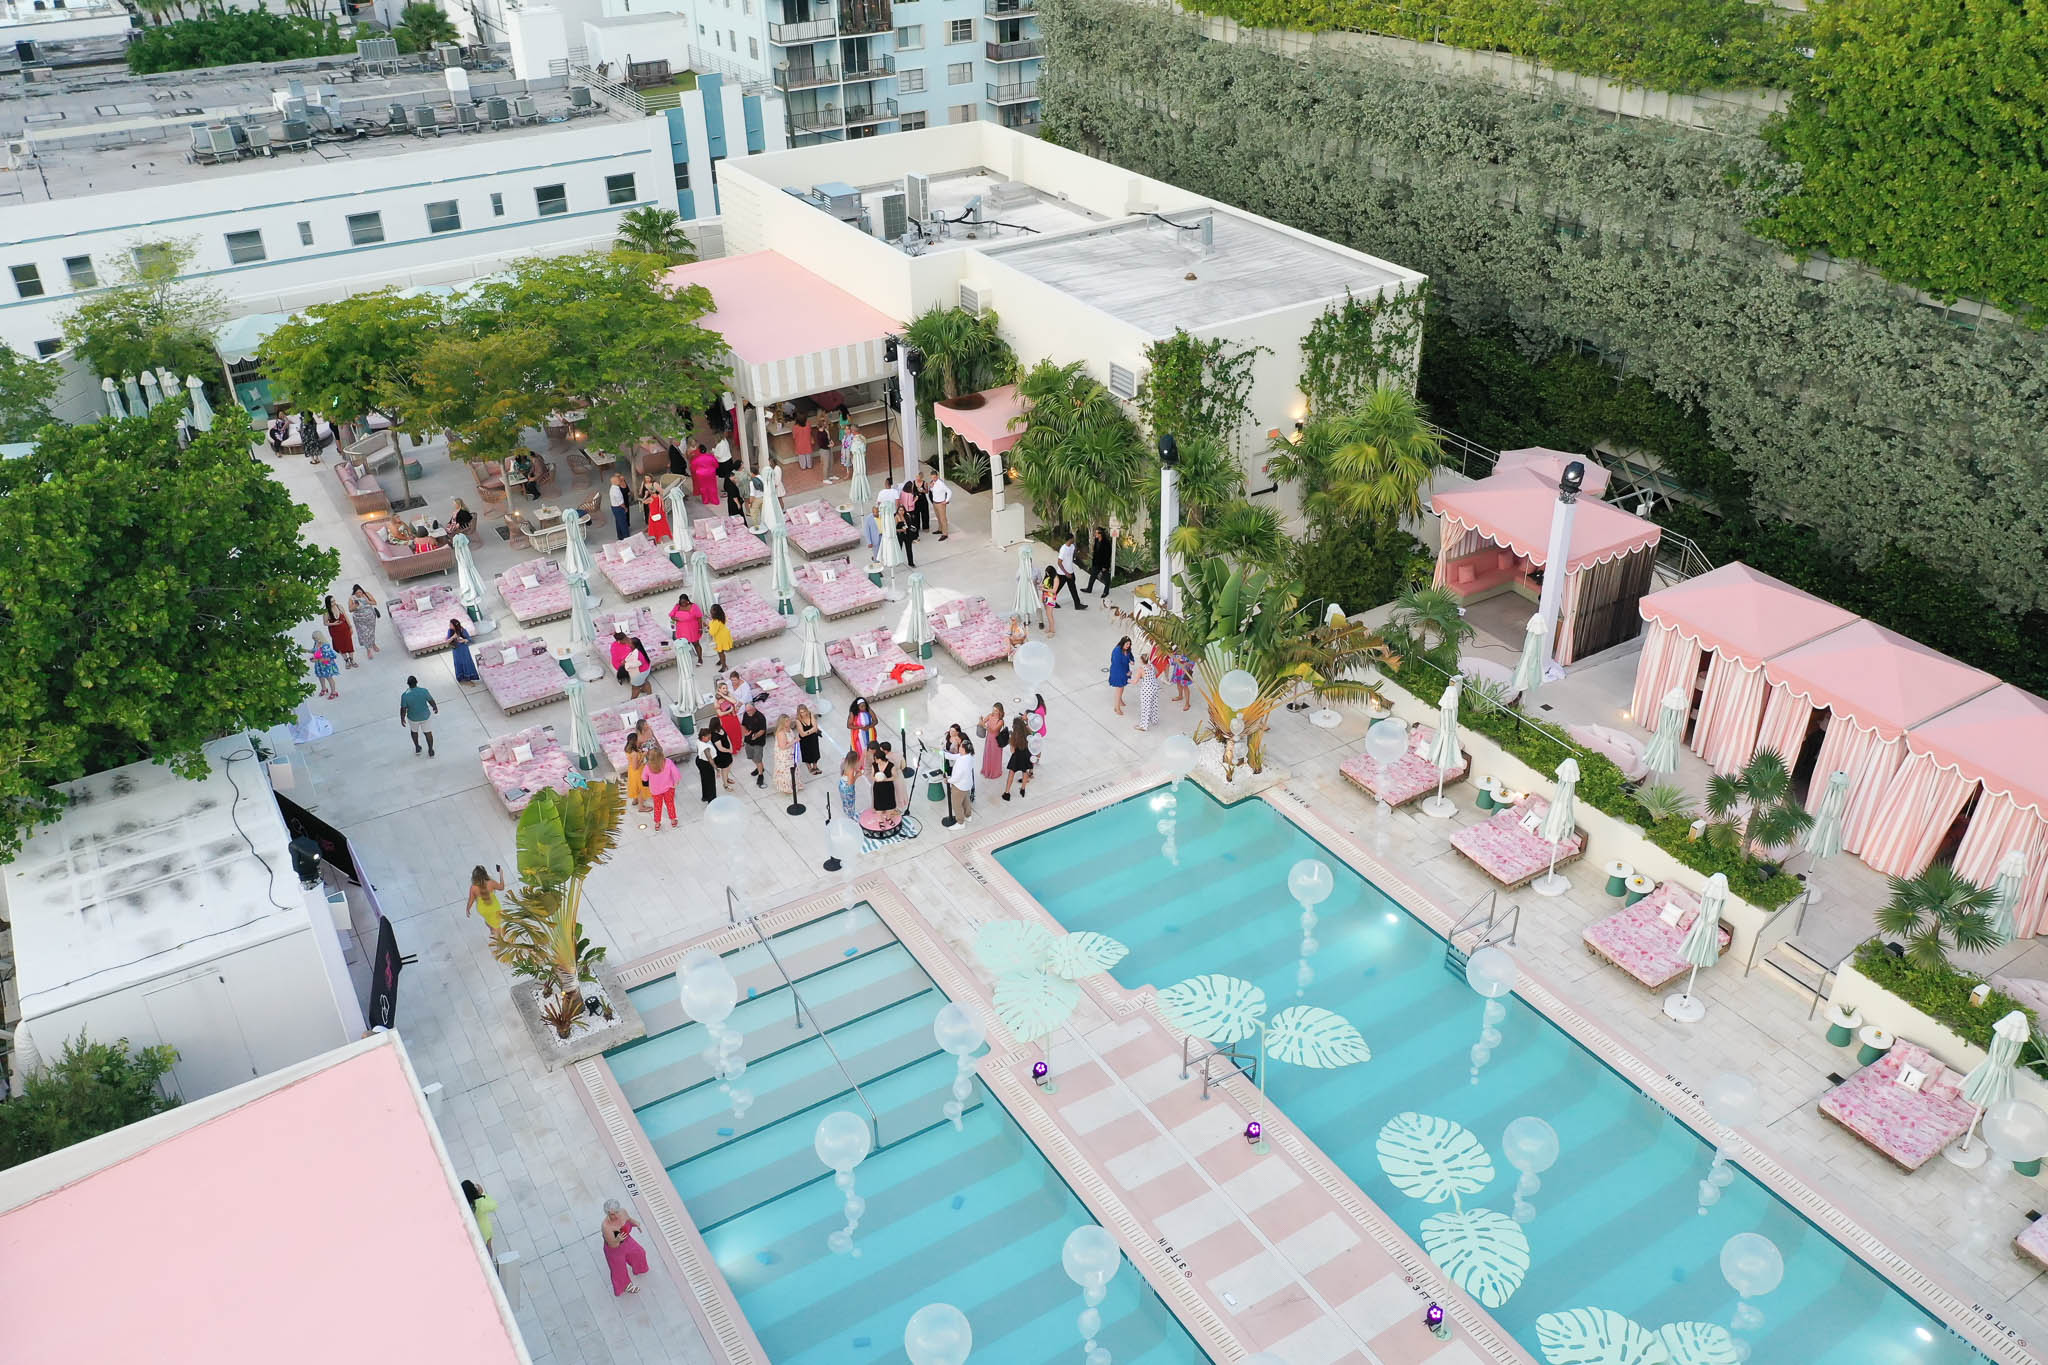 Photo of aerial shot of pool product launch Blue Spark Event Design - Miami